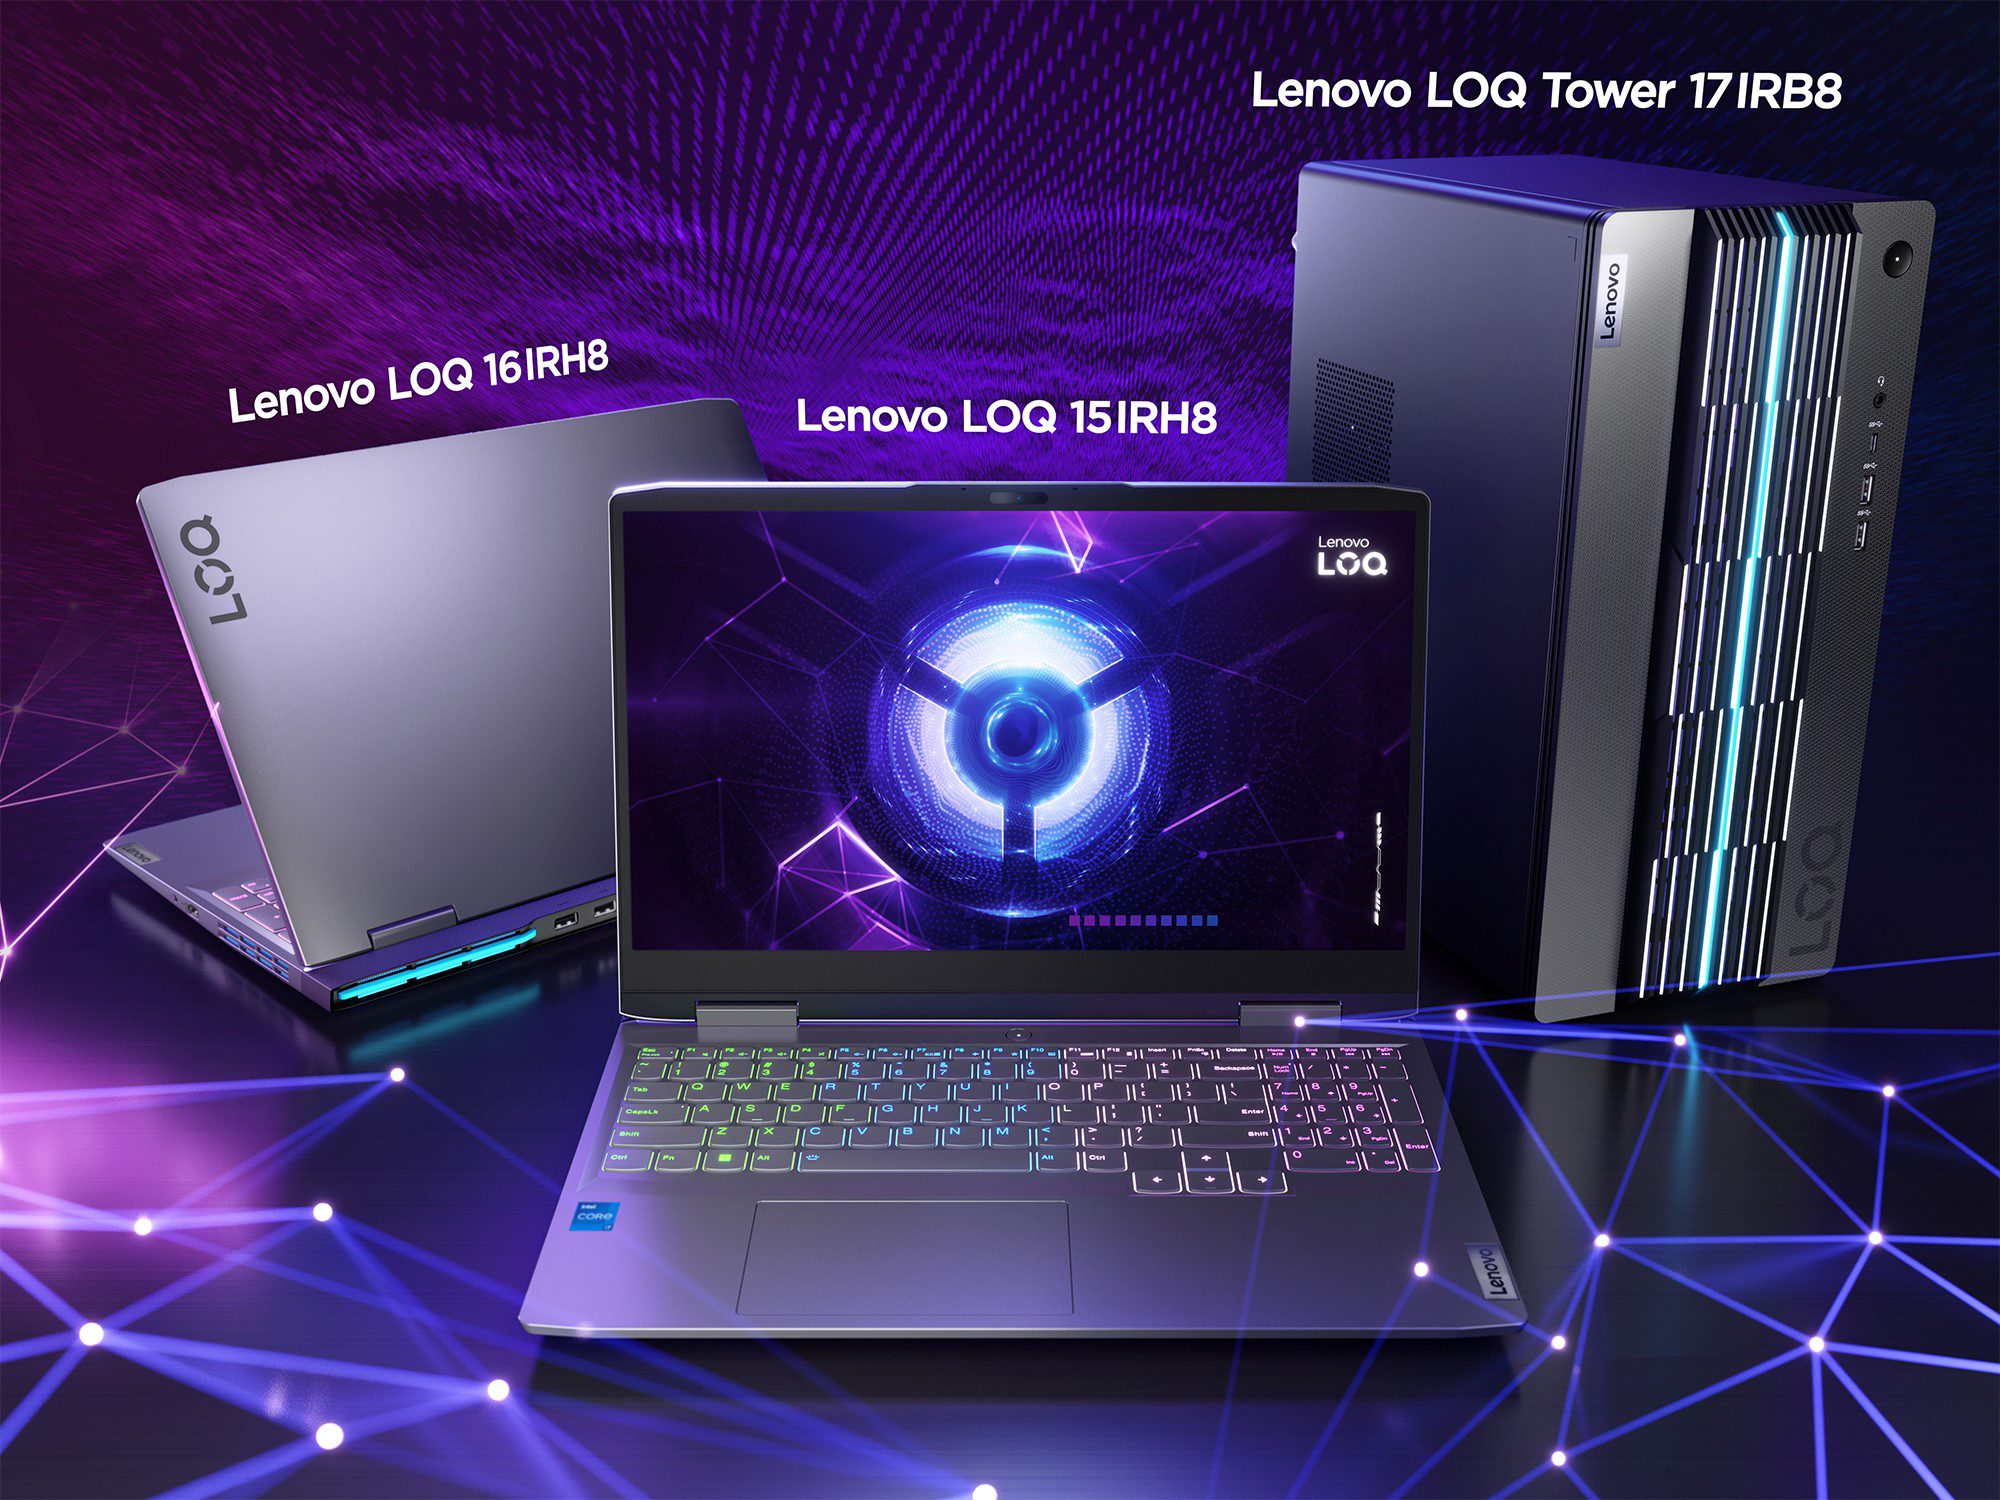 Introducing Brand New Lenovo Loq Gaming Laptops And Tower Pc For New Gamers Lenovo Storyhub 